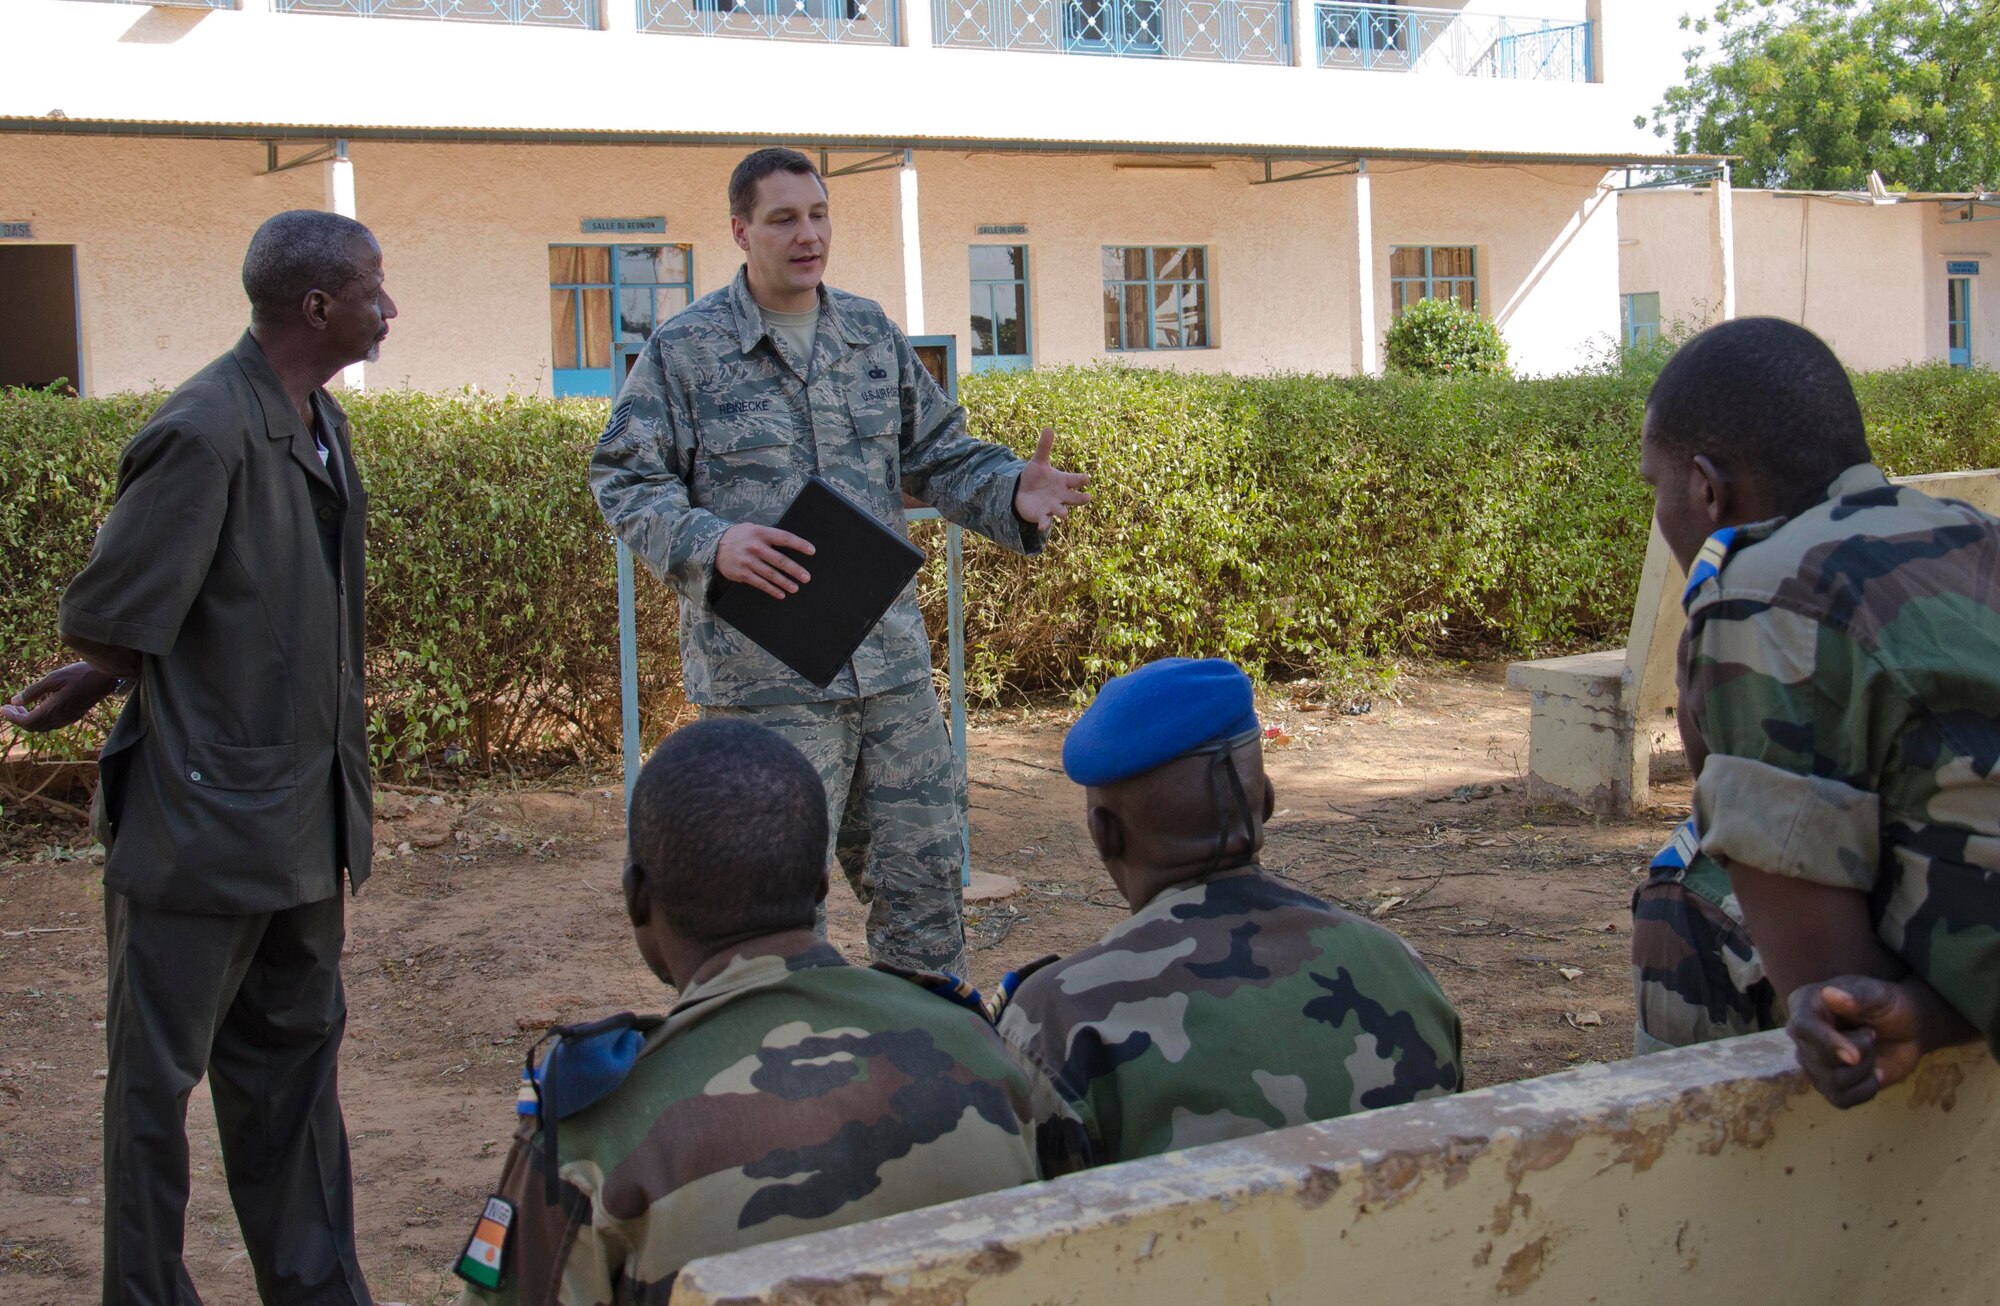 NIAMEY, Republic of Niger -- Tech. Sgt. Mark Reinecke, 818th Mobility Support Advisory Squadron air advisor, trains members of the Niger National Flight at Airbase 101, Niamey, Niger, Nov. 6, 2013. The engagement consisted of training the NAF in air drop operations, aircraft maintenance, aircrew survival, intelligence operations, aeromedical evacuation, field casualty care, and air base defense and entry control procedures. (U.S. Air Force photo by Maj. Sean Hook)